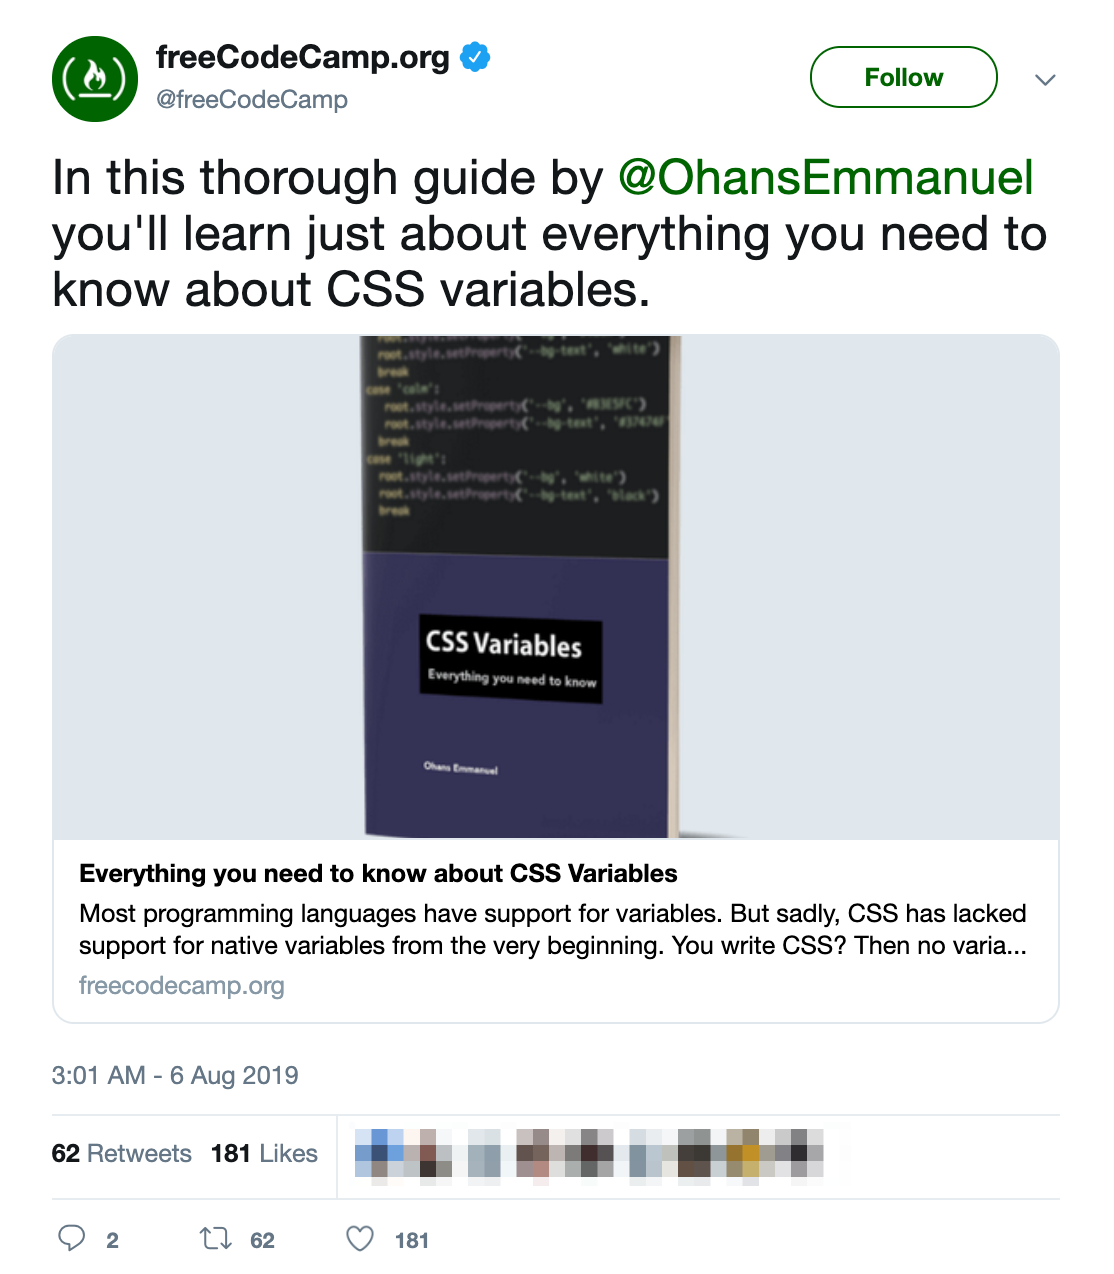 freeCodeCamp_org_on_Twitter___In_this_thorough_guide_by__OhansEmmanuel_you_ll_learn_just_about_everything_you_need_to_know_about_CSS_variables__https___t_co_h3f7YhRPuz_